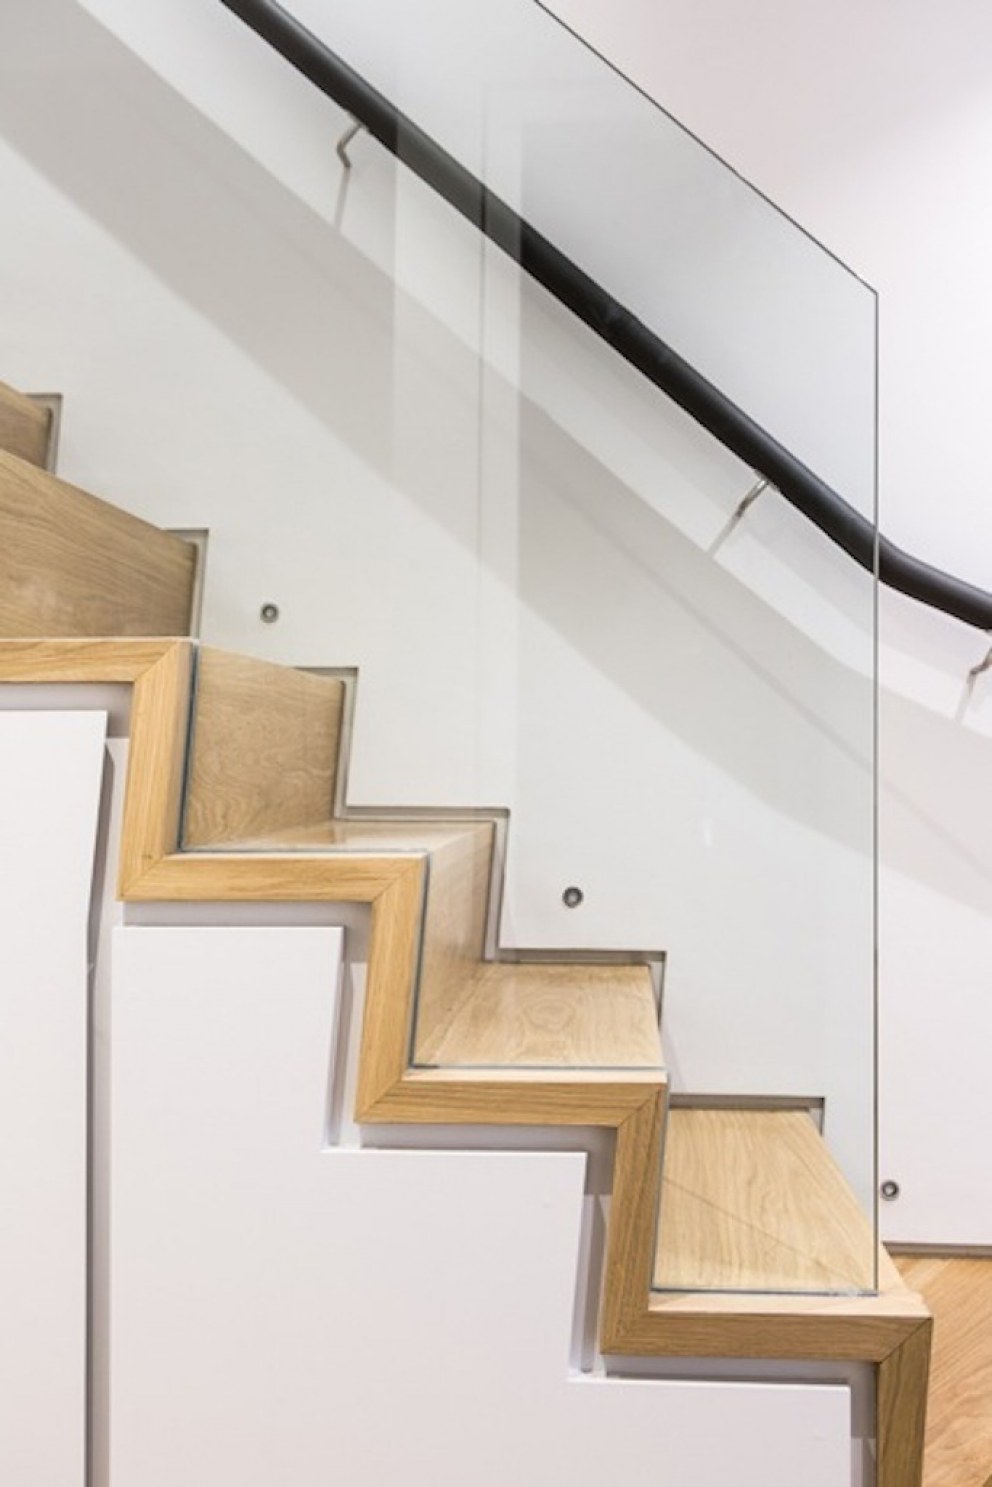 Chiswick basement | Staircase side view | Interior Designers